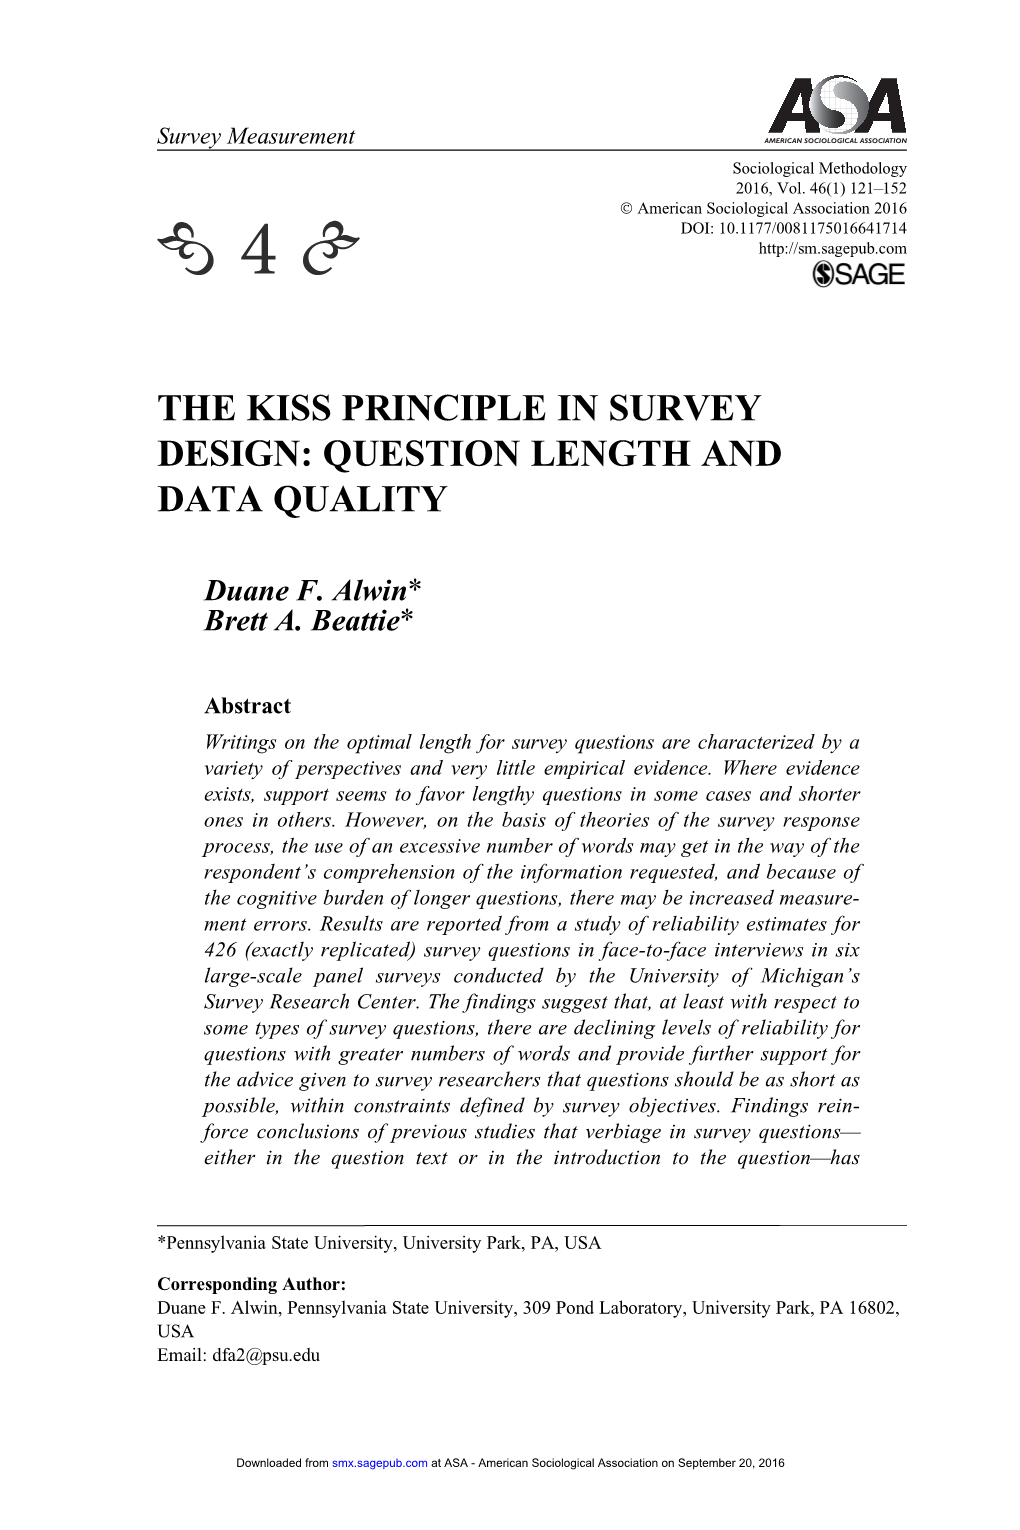 The Kiss Principle in Survey Design: Question Length and Data Quality